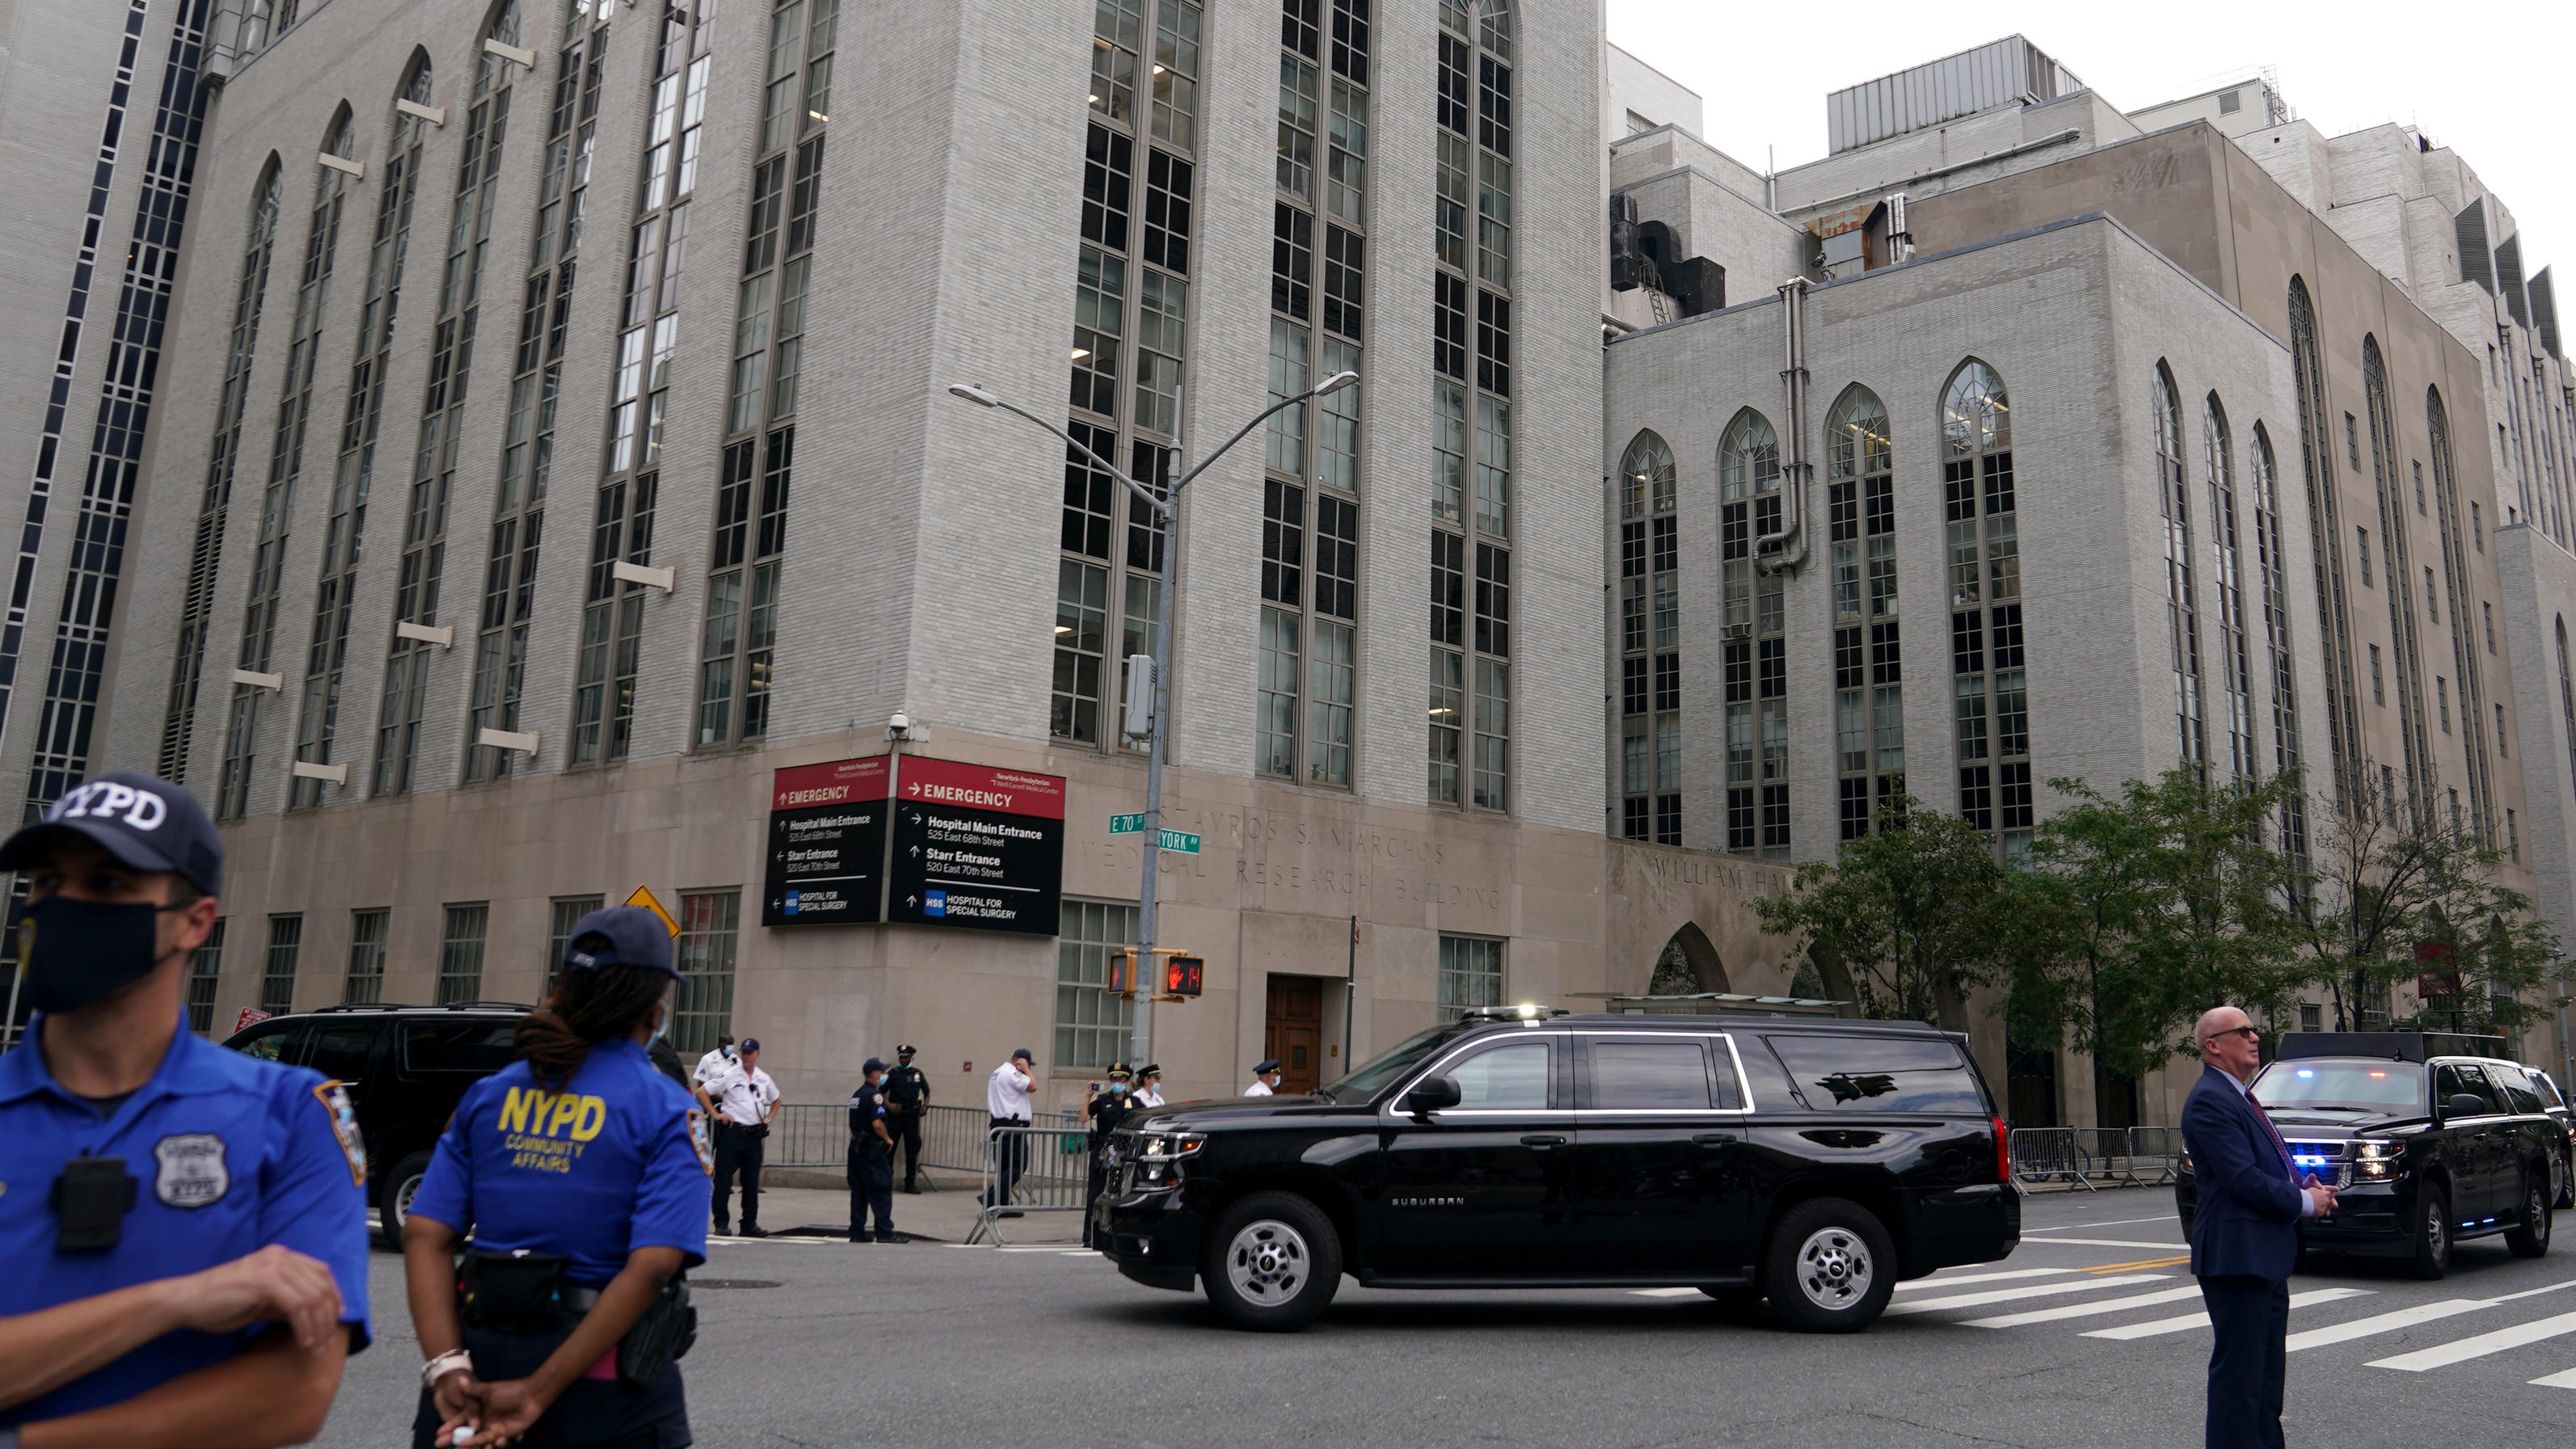 The motorcade of U.S. President Donald Trump arrives at New York Presbyterian Hospital, where his brother Robert has been hospitalised in New York City, U.S., August 14, 2020. REUTERS/Carlo Allegri